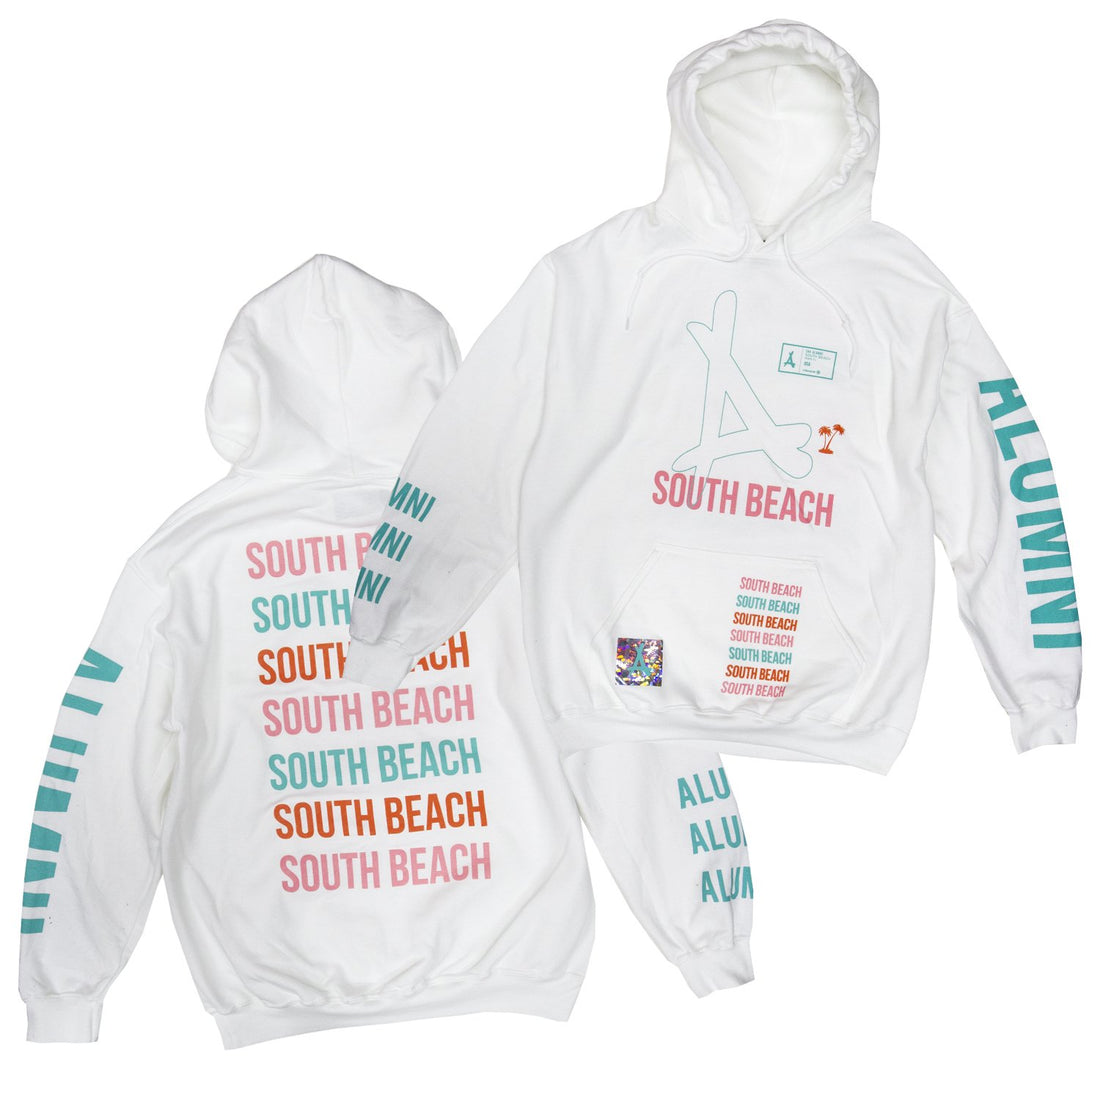 South Beach Capsule - Now Available!